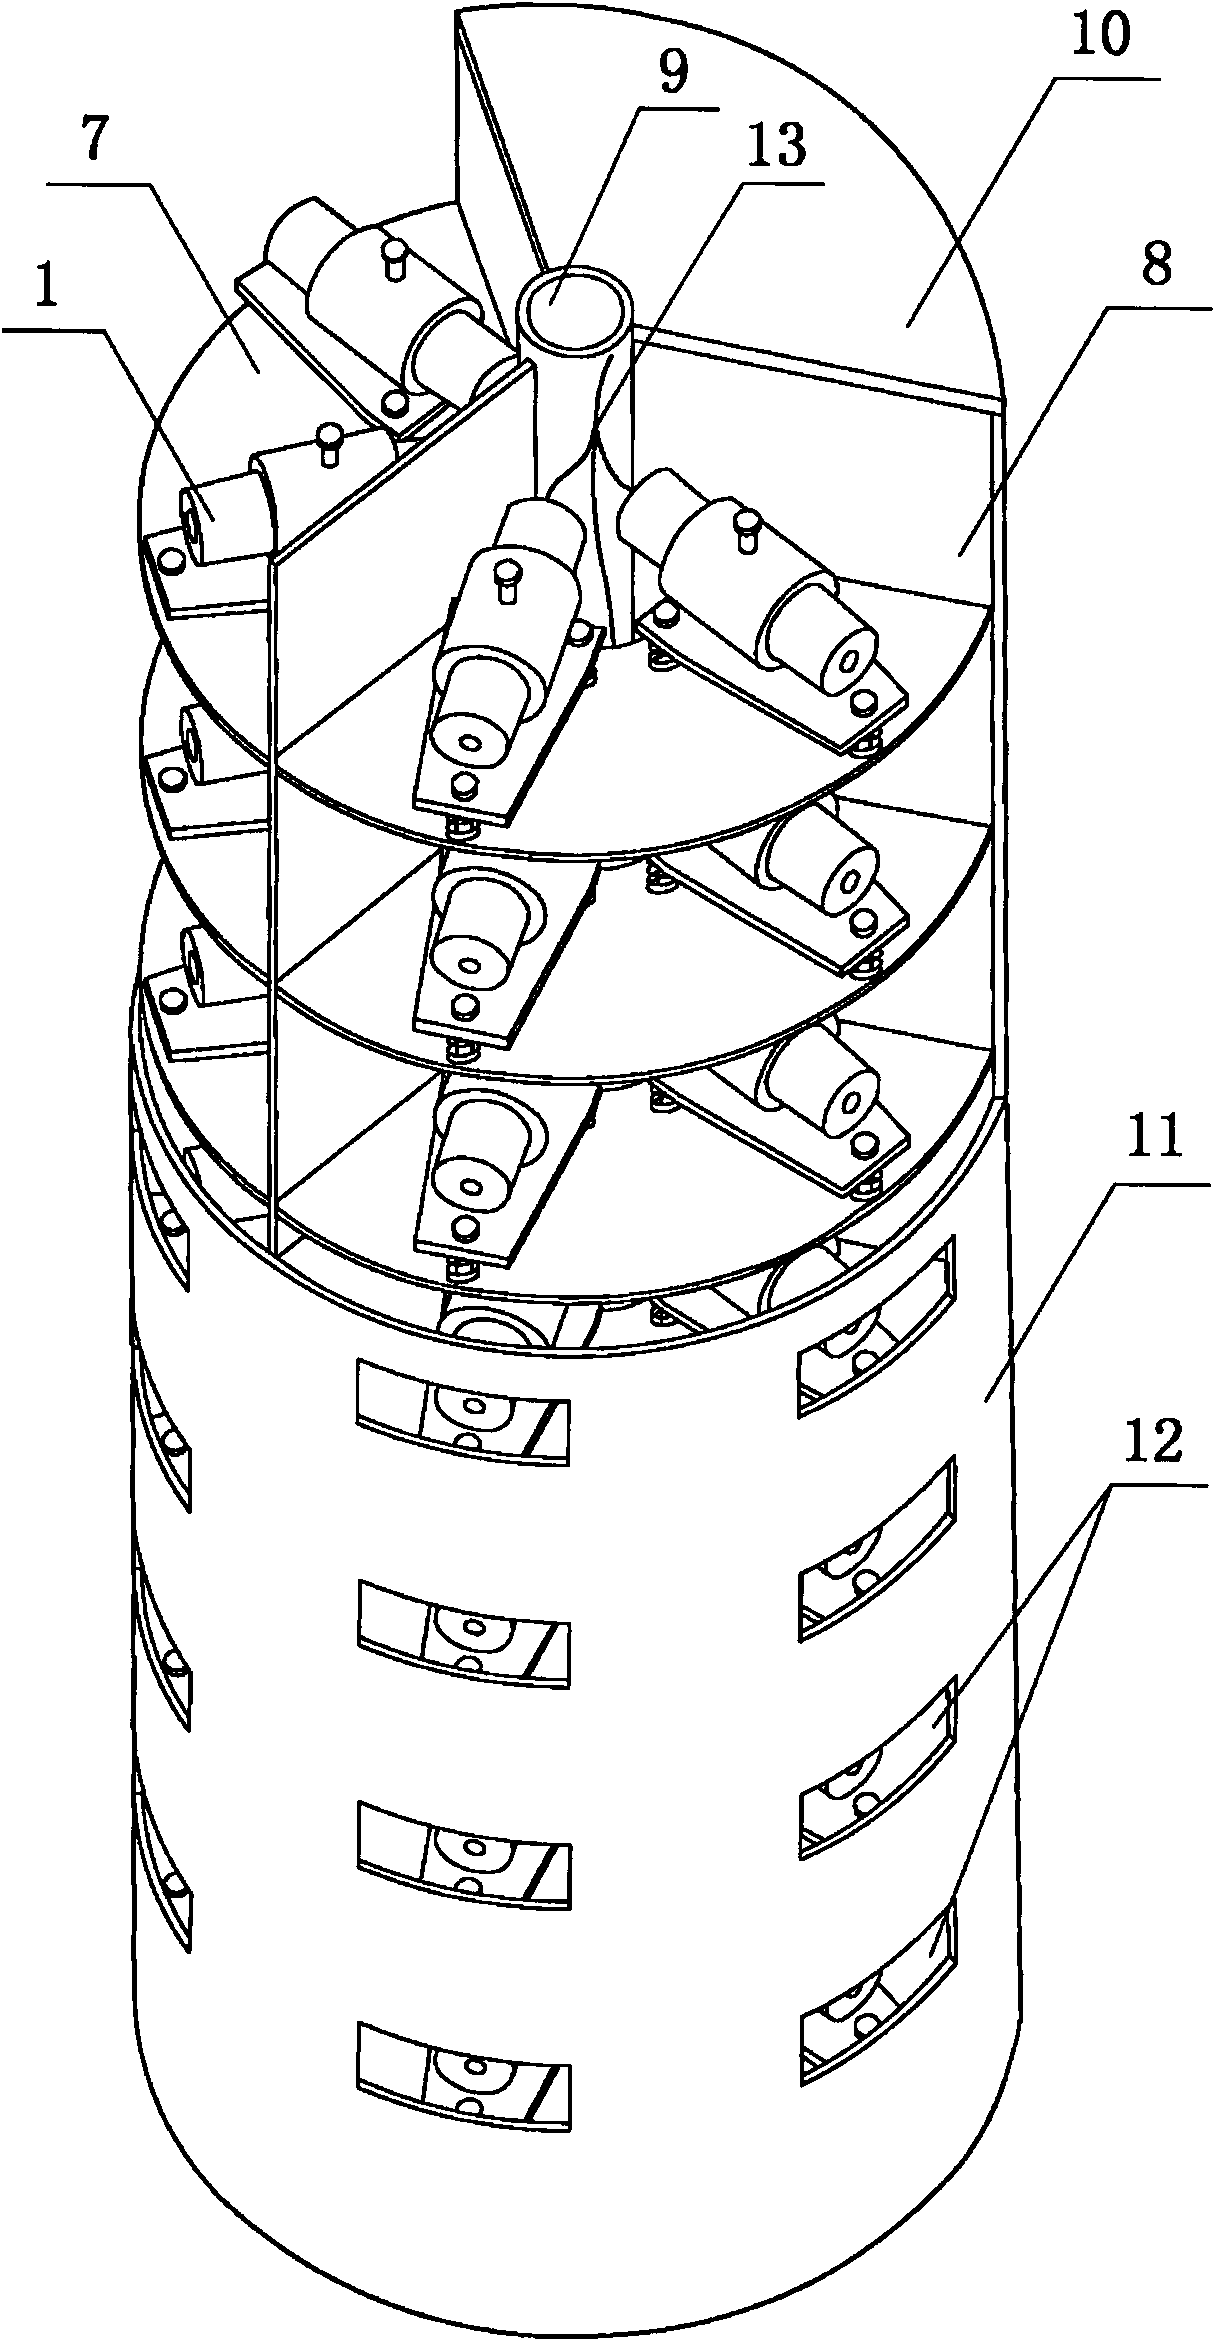 Three-dimensional observation device for scouring terrain